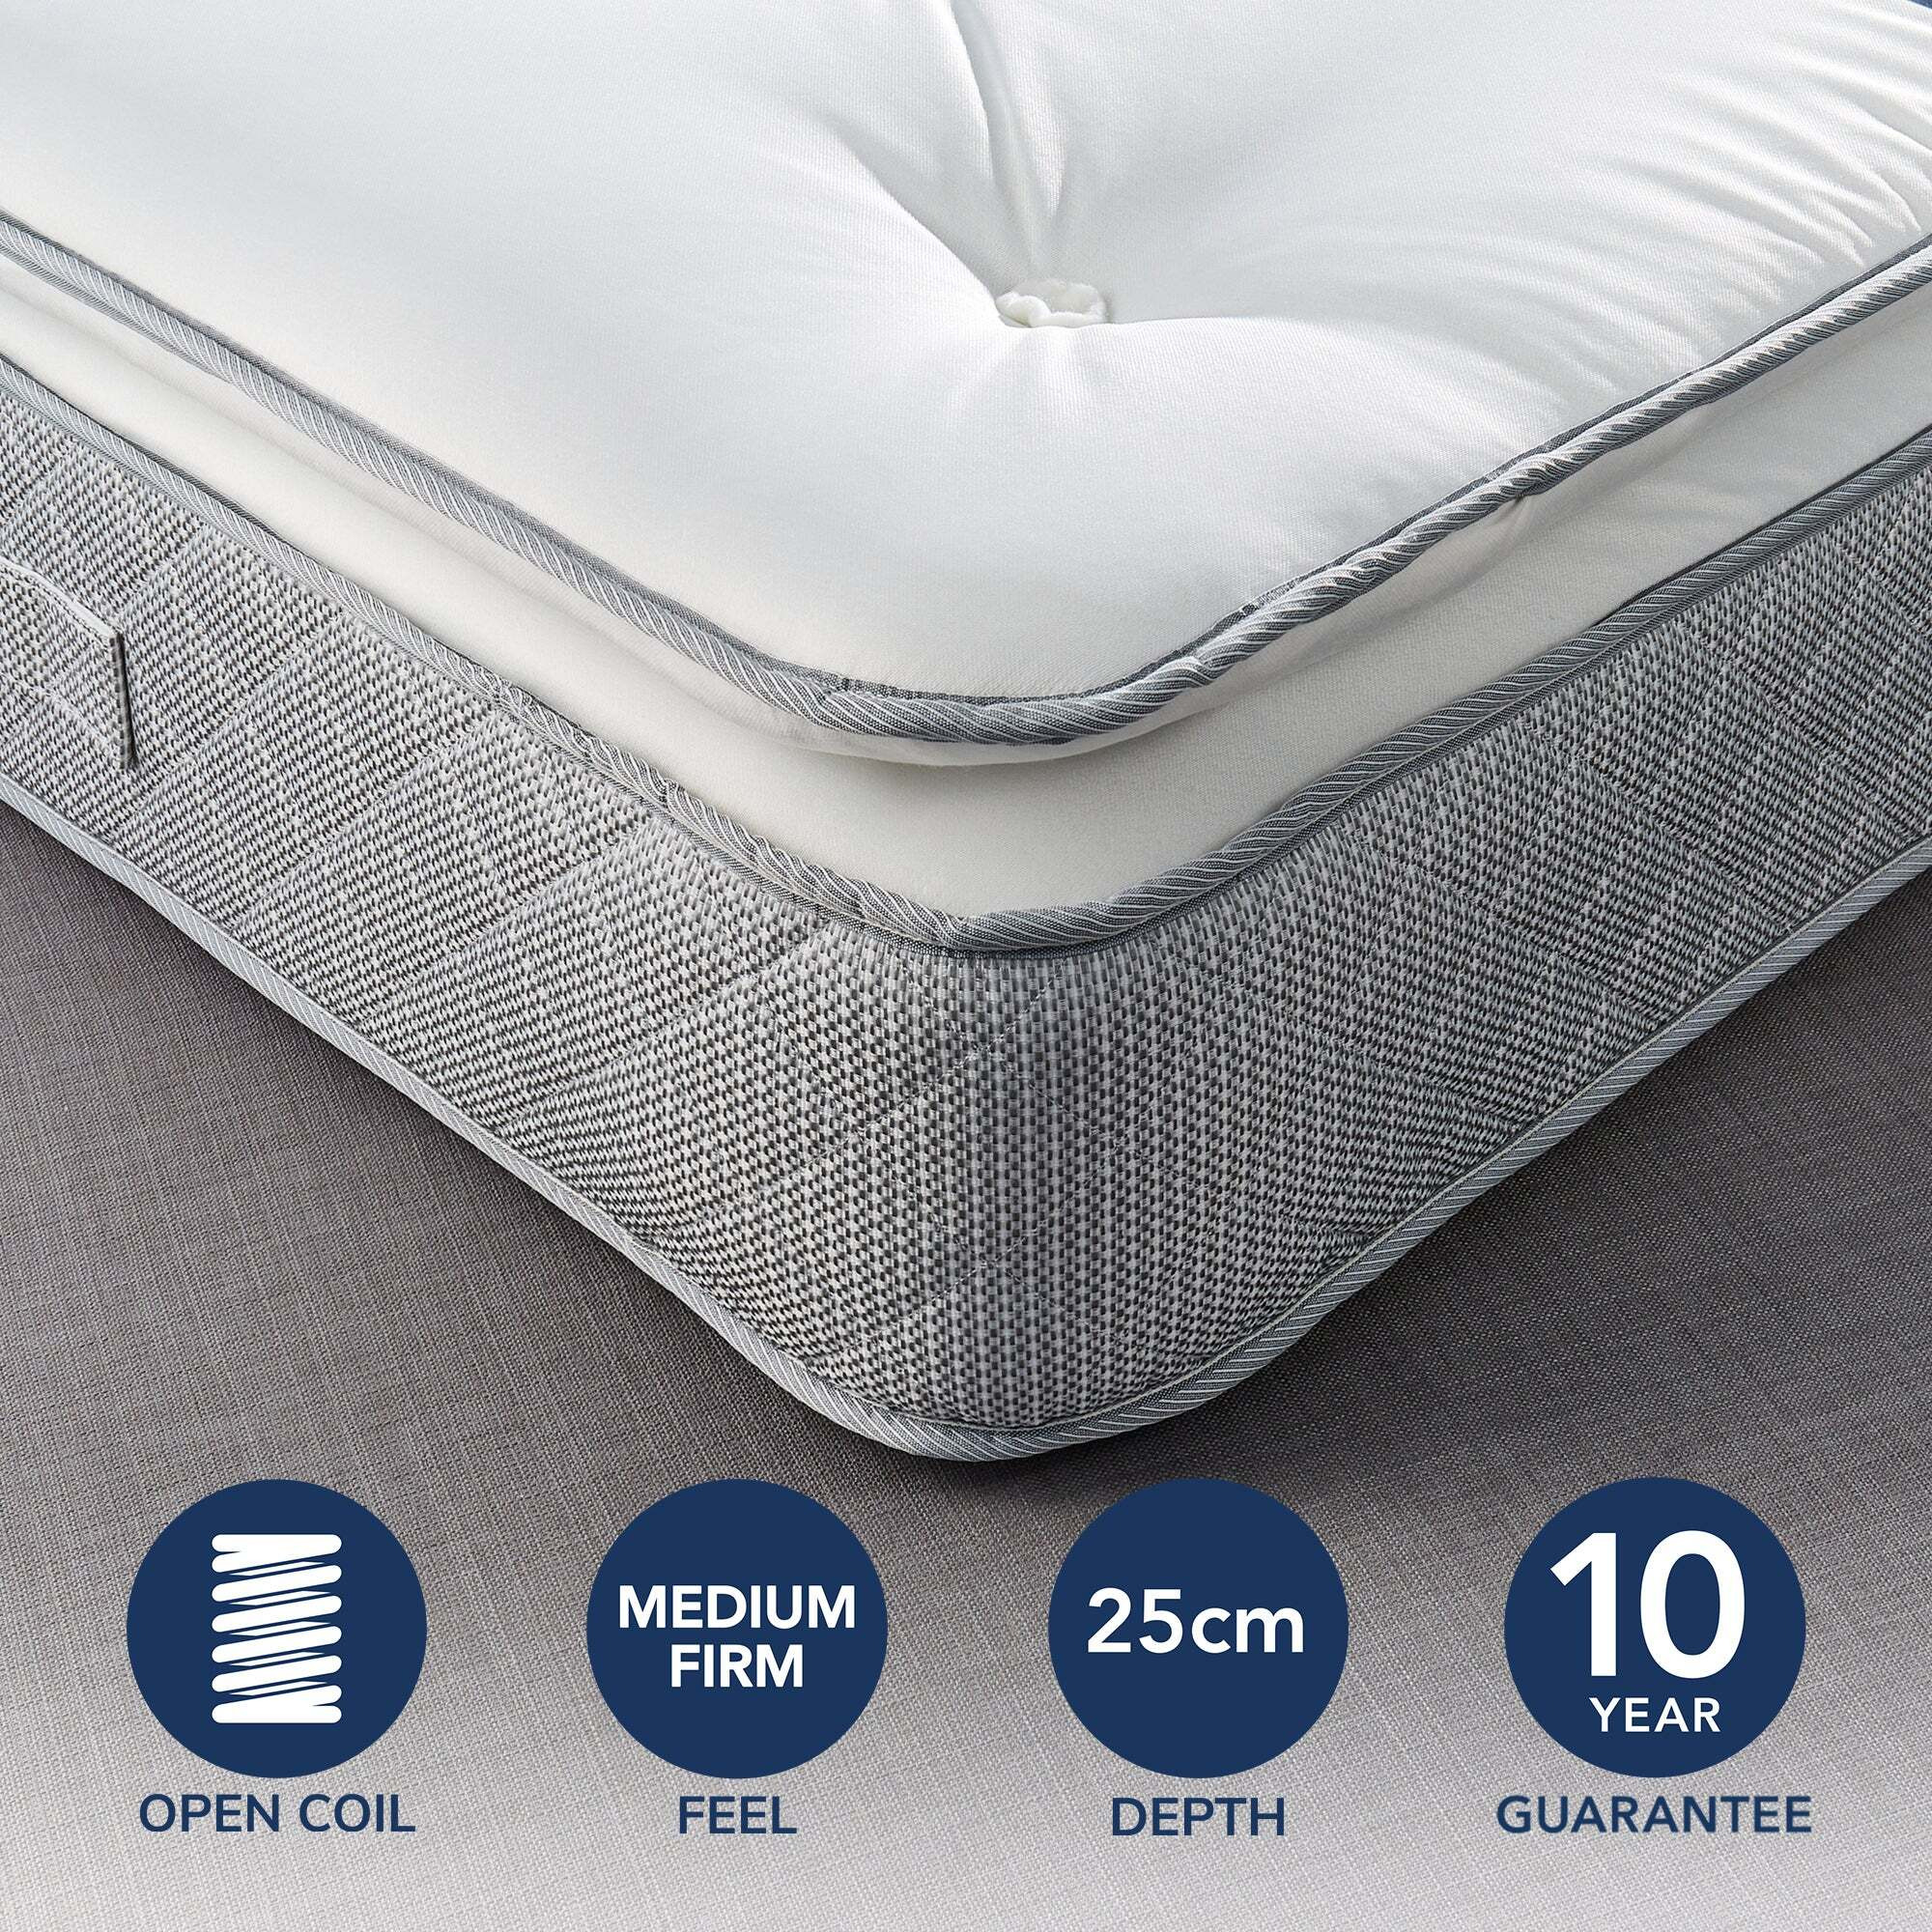 Fogarty Just Right Pillow Top Orthopaedic Open Coil Mattress White